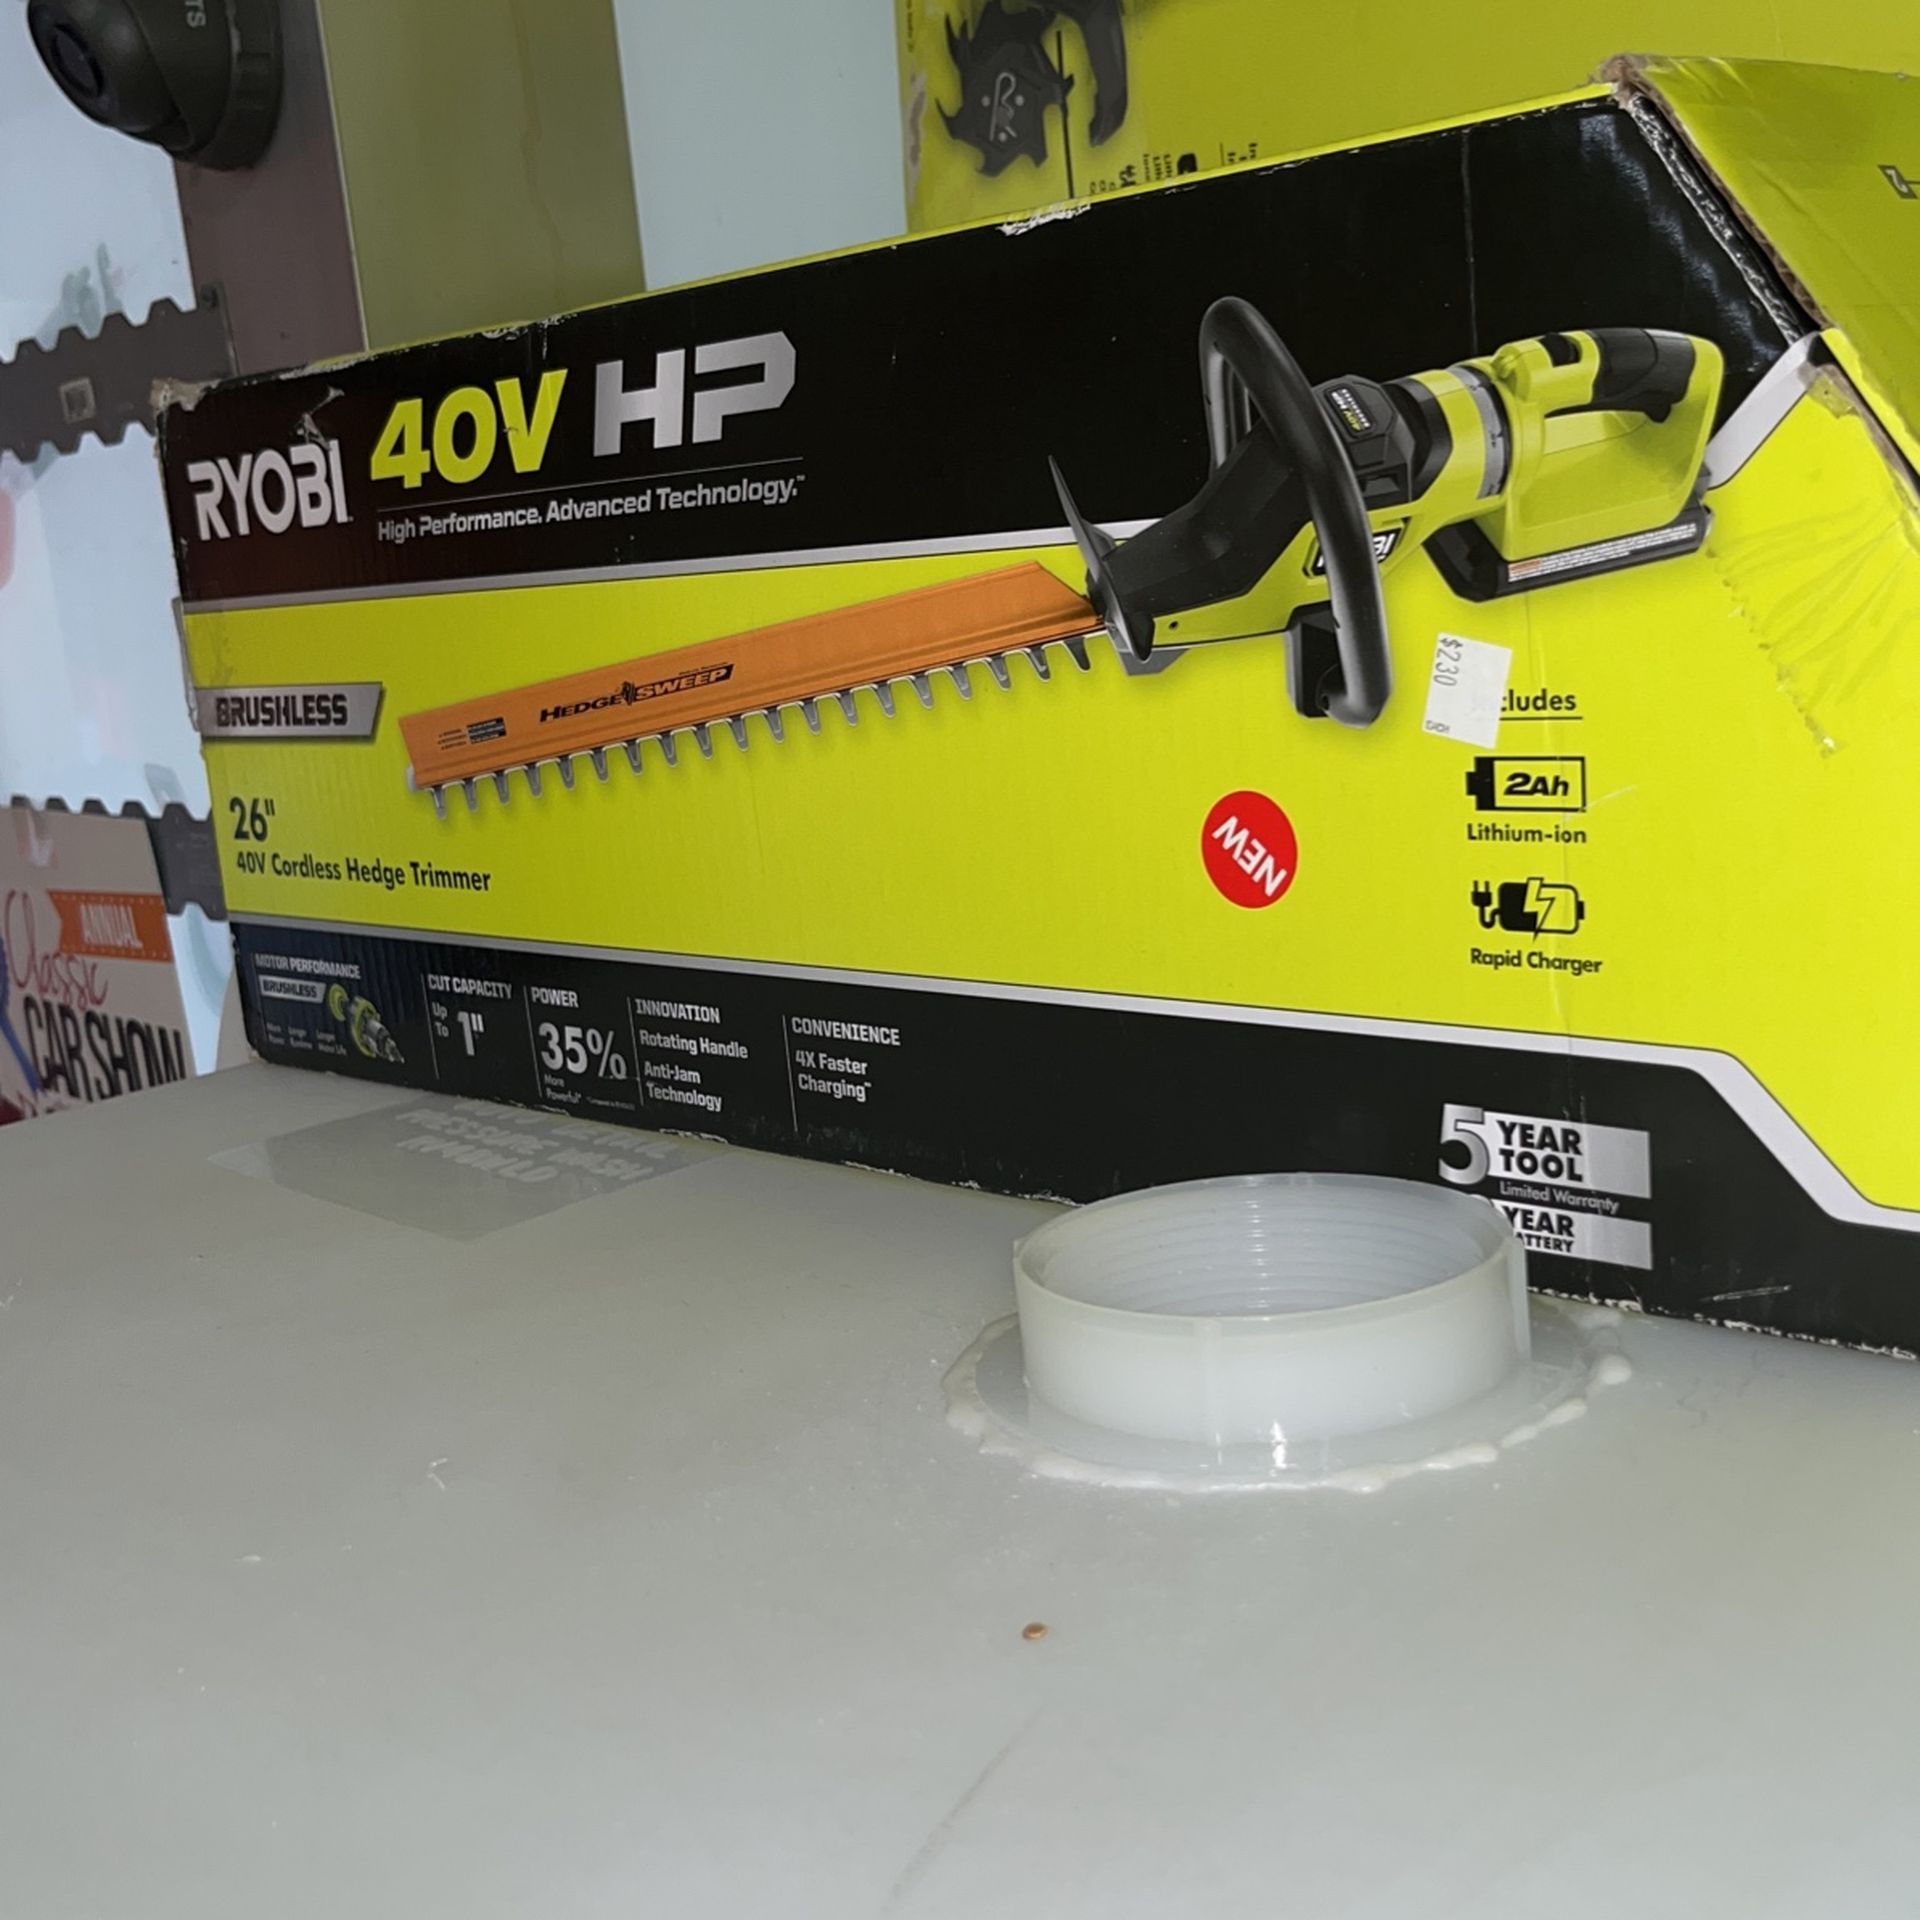 26” Ryobi 40 Volt Cordless Hedge Trimmer Kit With Battery,Charger $230 